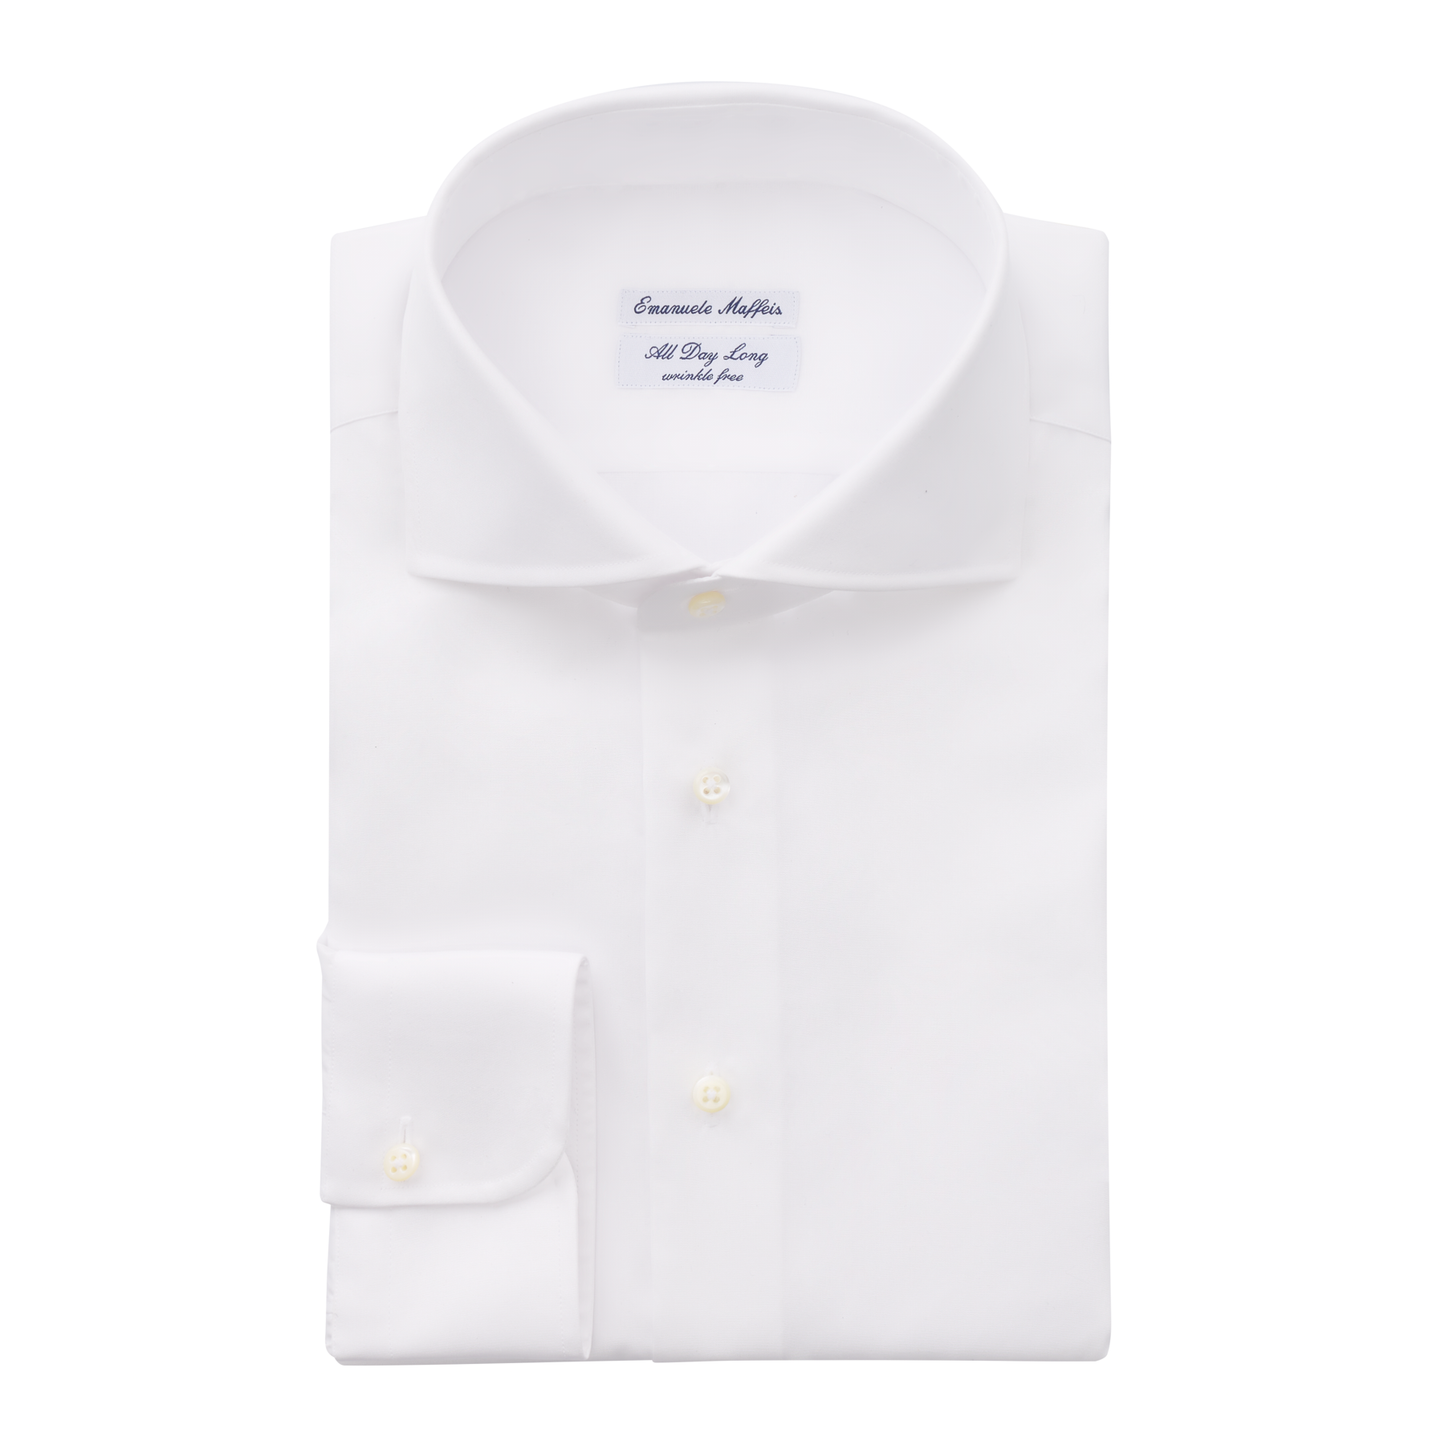 Emanuele Maffeis "All Day Long Collection" Classic Cotton White Shirt - SARTALE